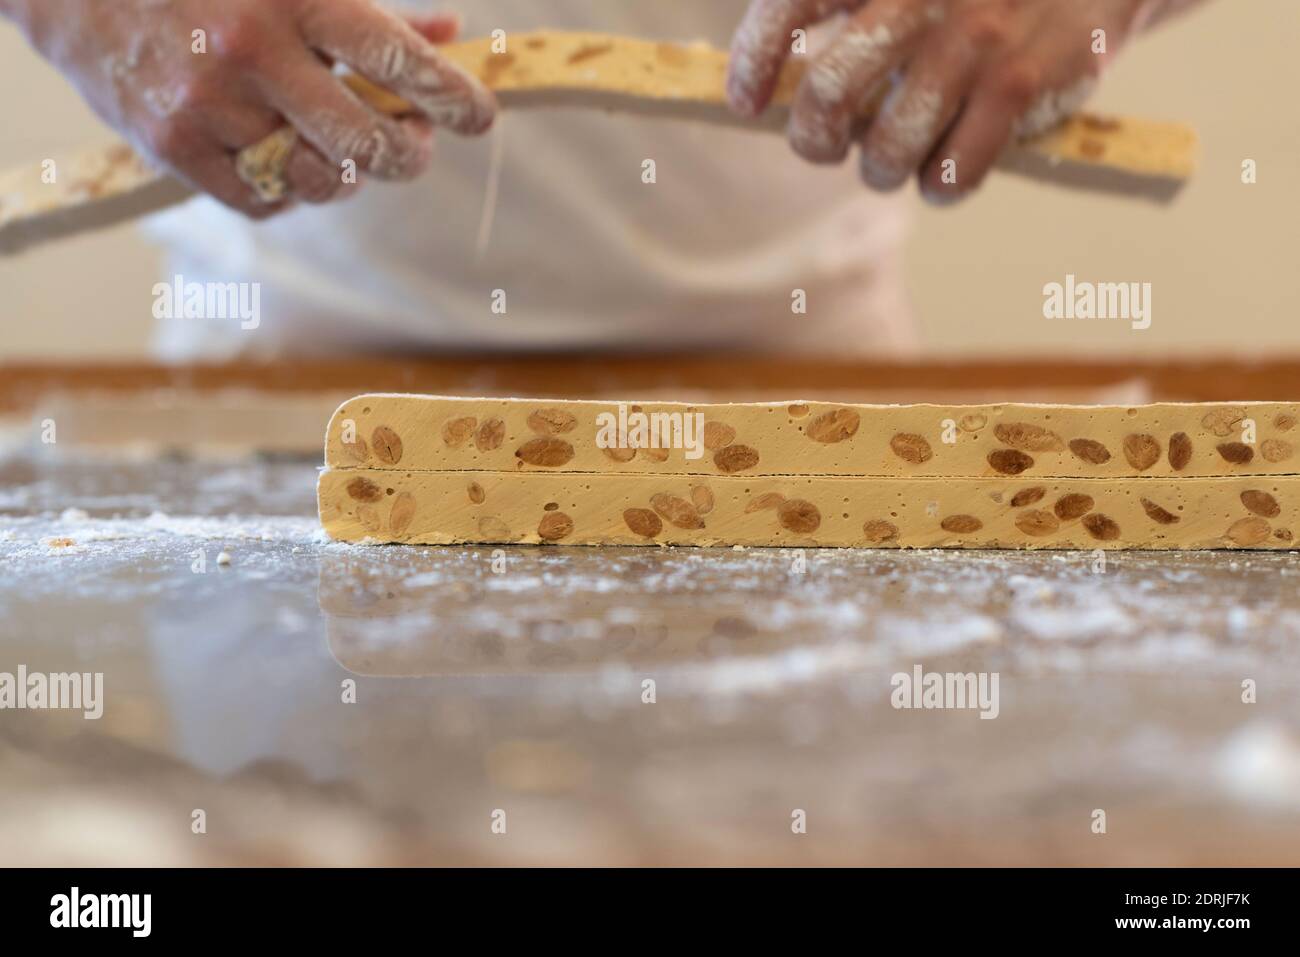 Montelimar (south of France): making of nougat in the traditional nougat factory Le Chaudron d’or Stock Photo